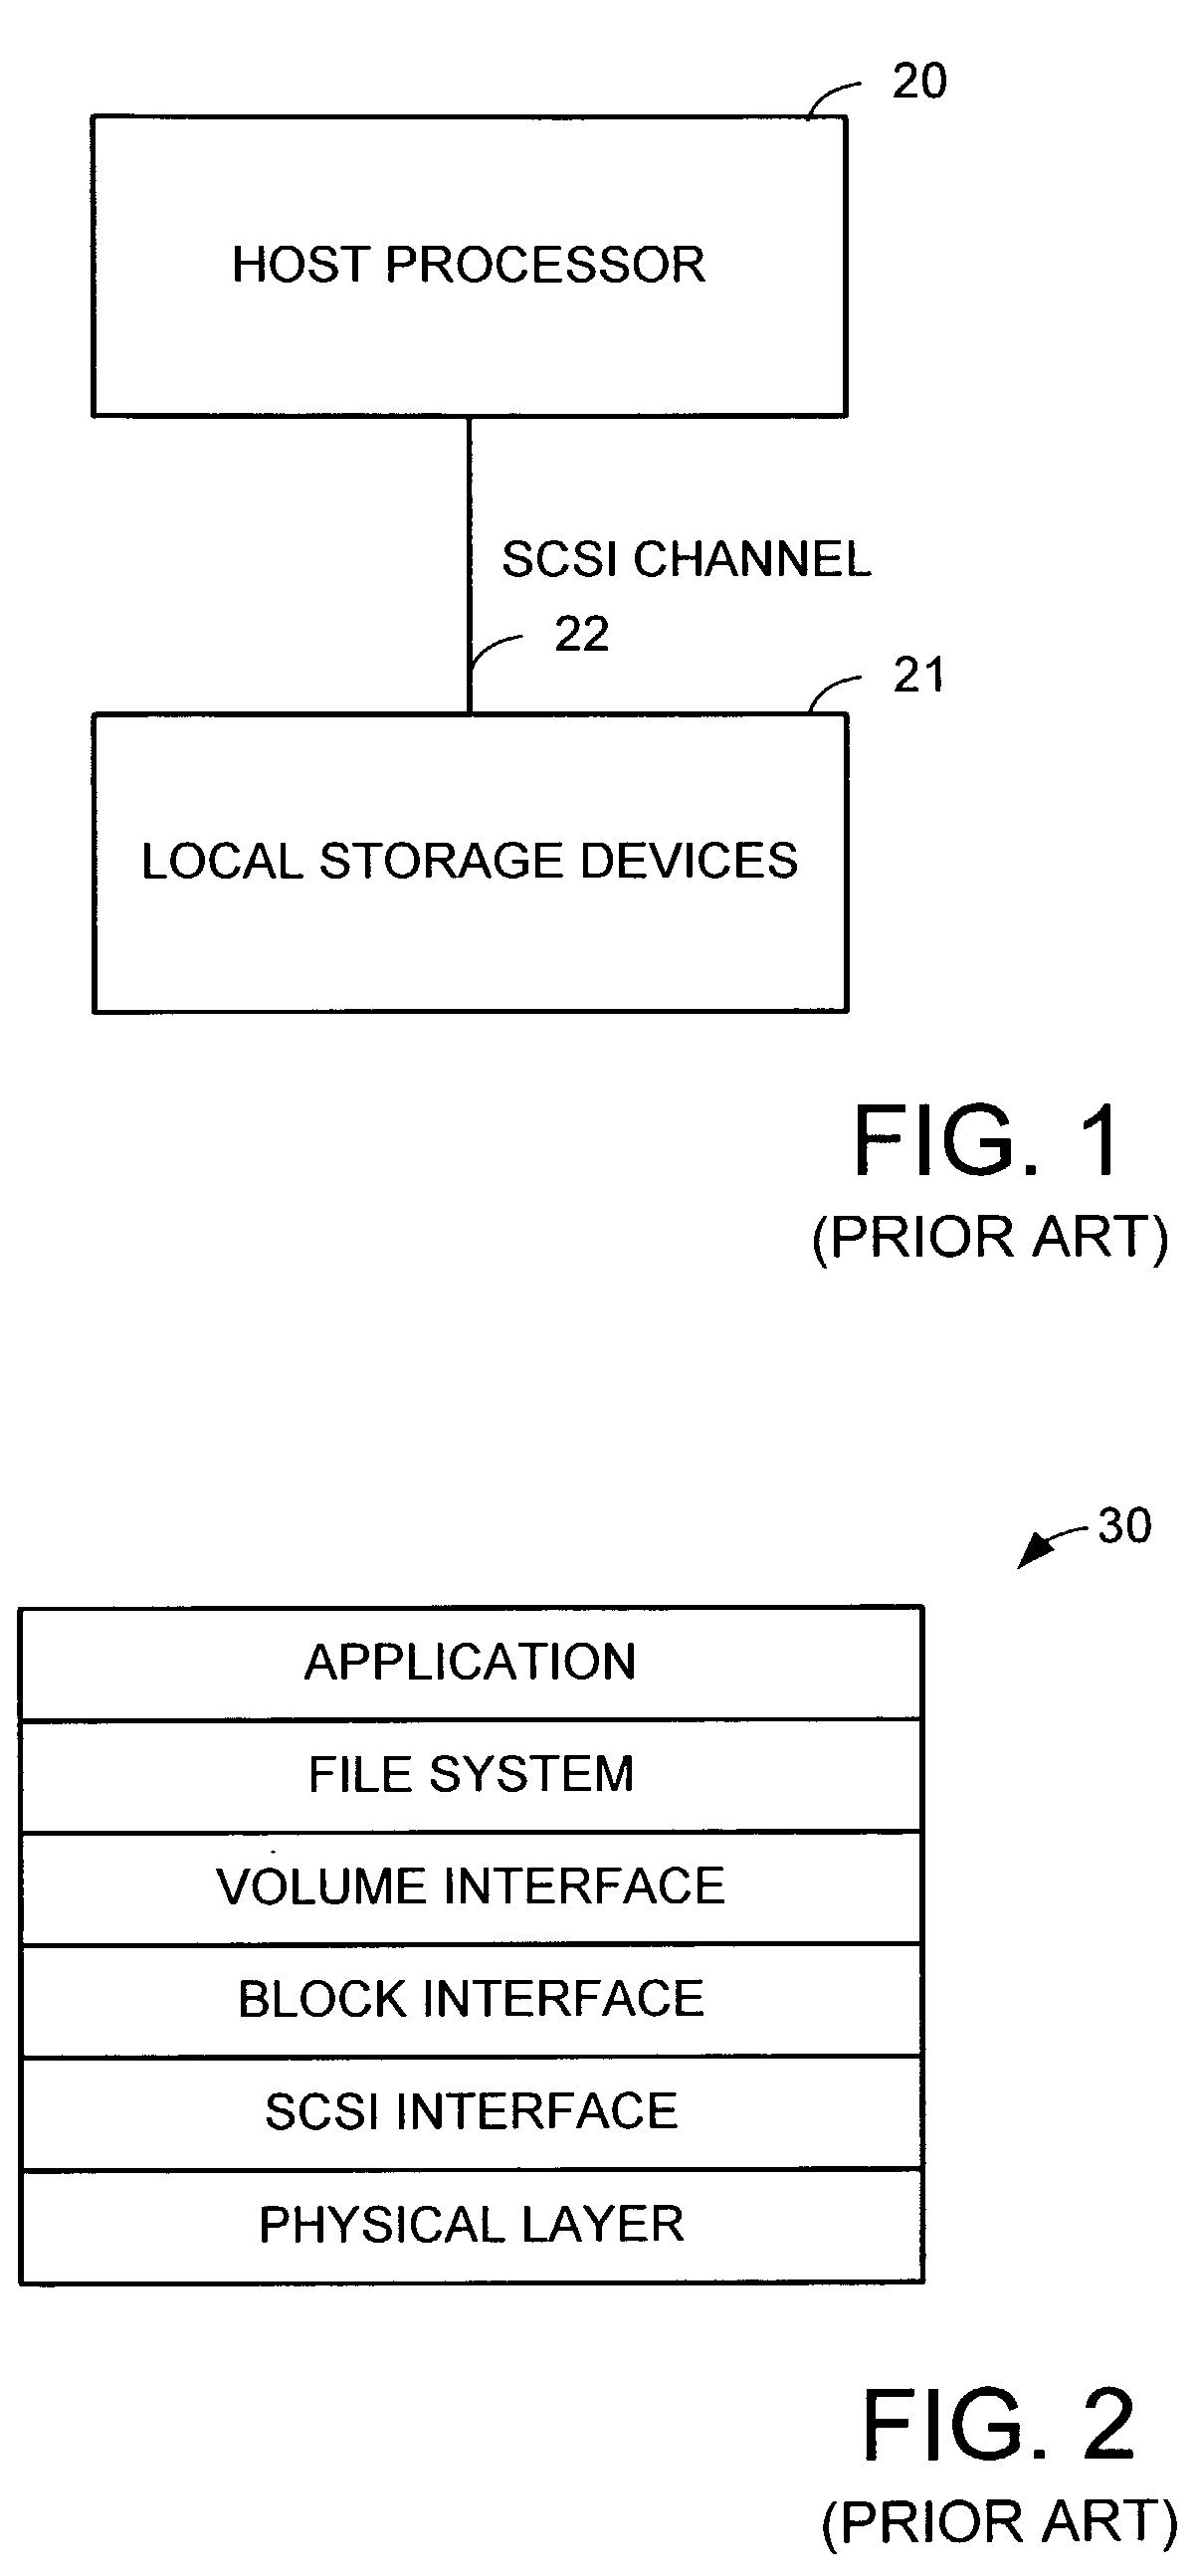 Network block services for client access of network-attached data storage in an IP network